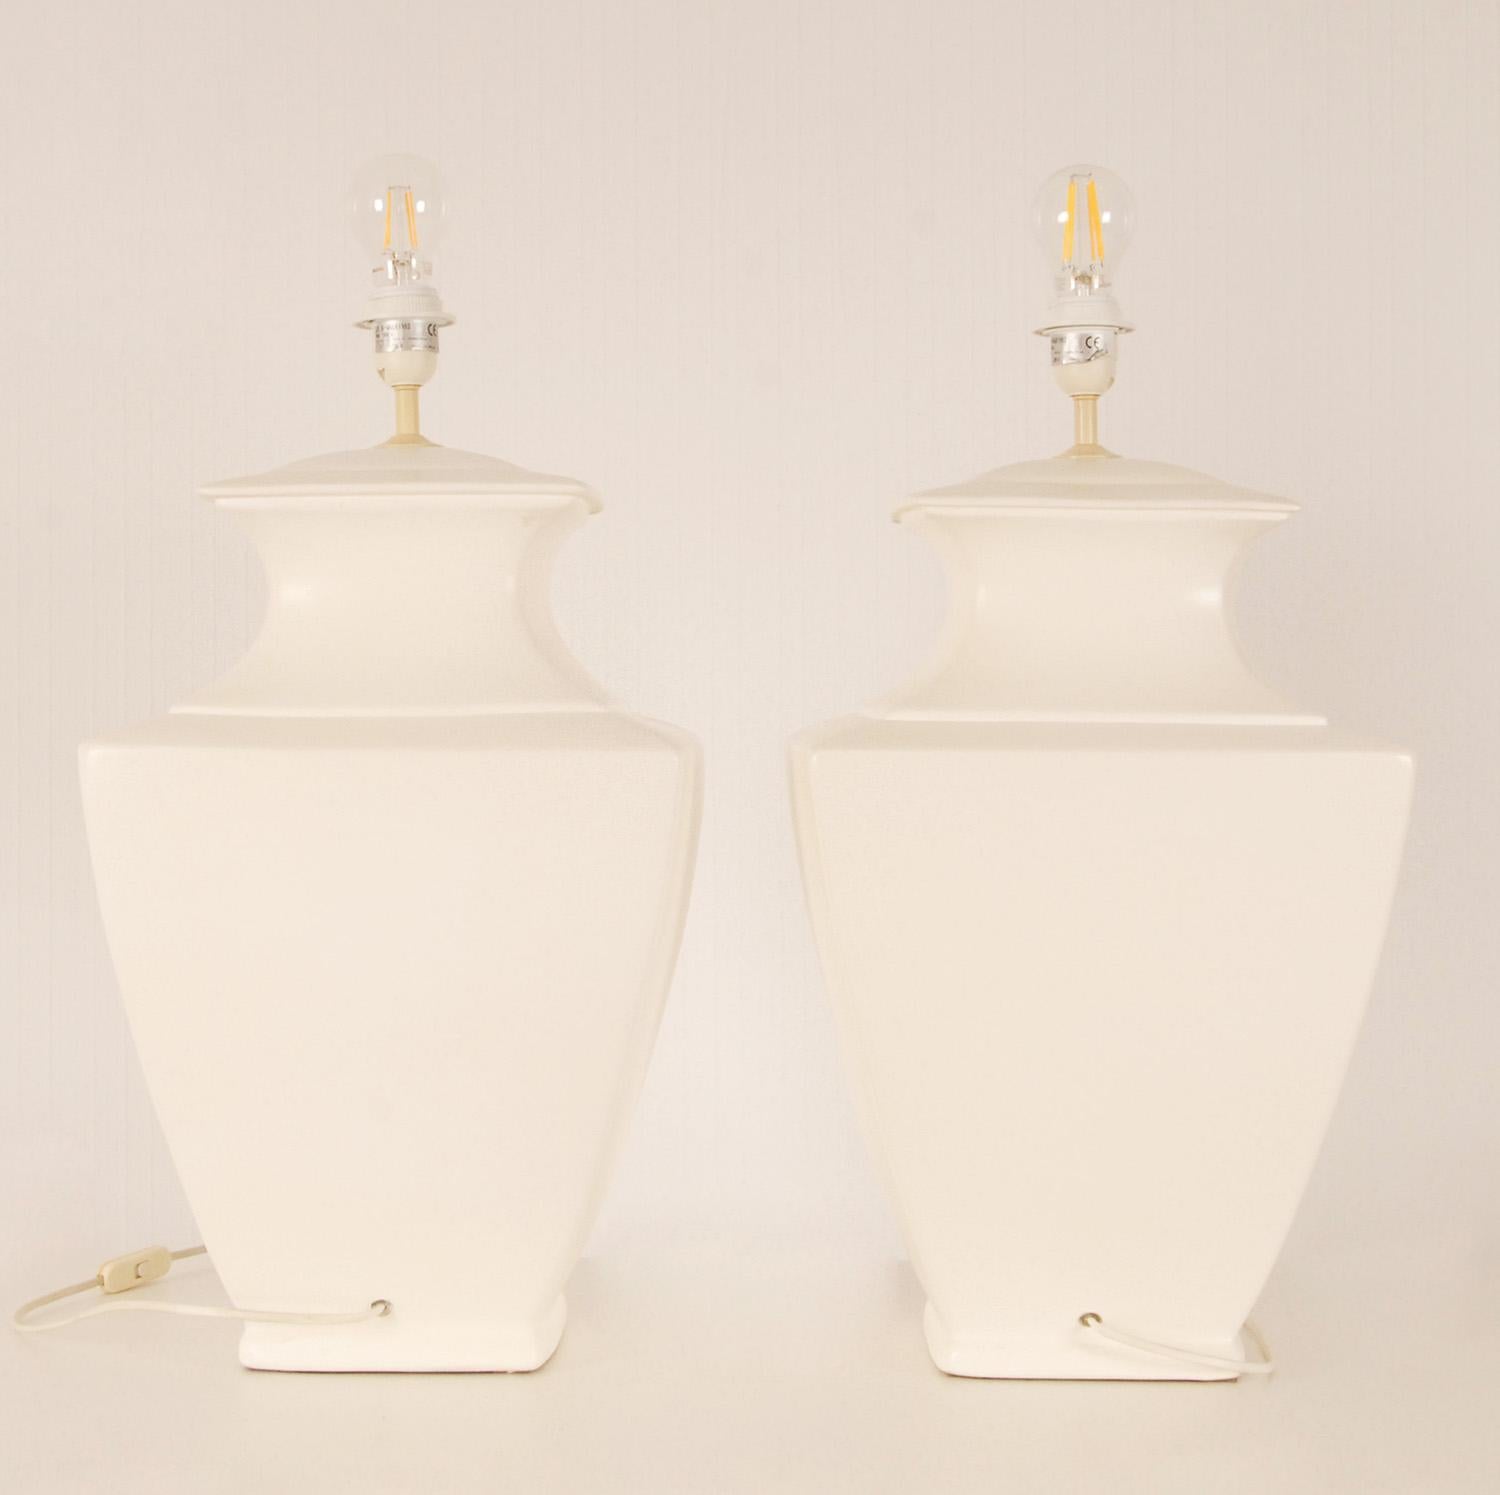 Vintage Ceramic Lamps Tall Modern Square blue White Chinoiserie Table Lamps pair 3